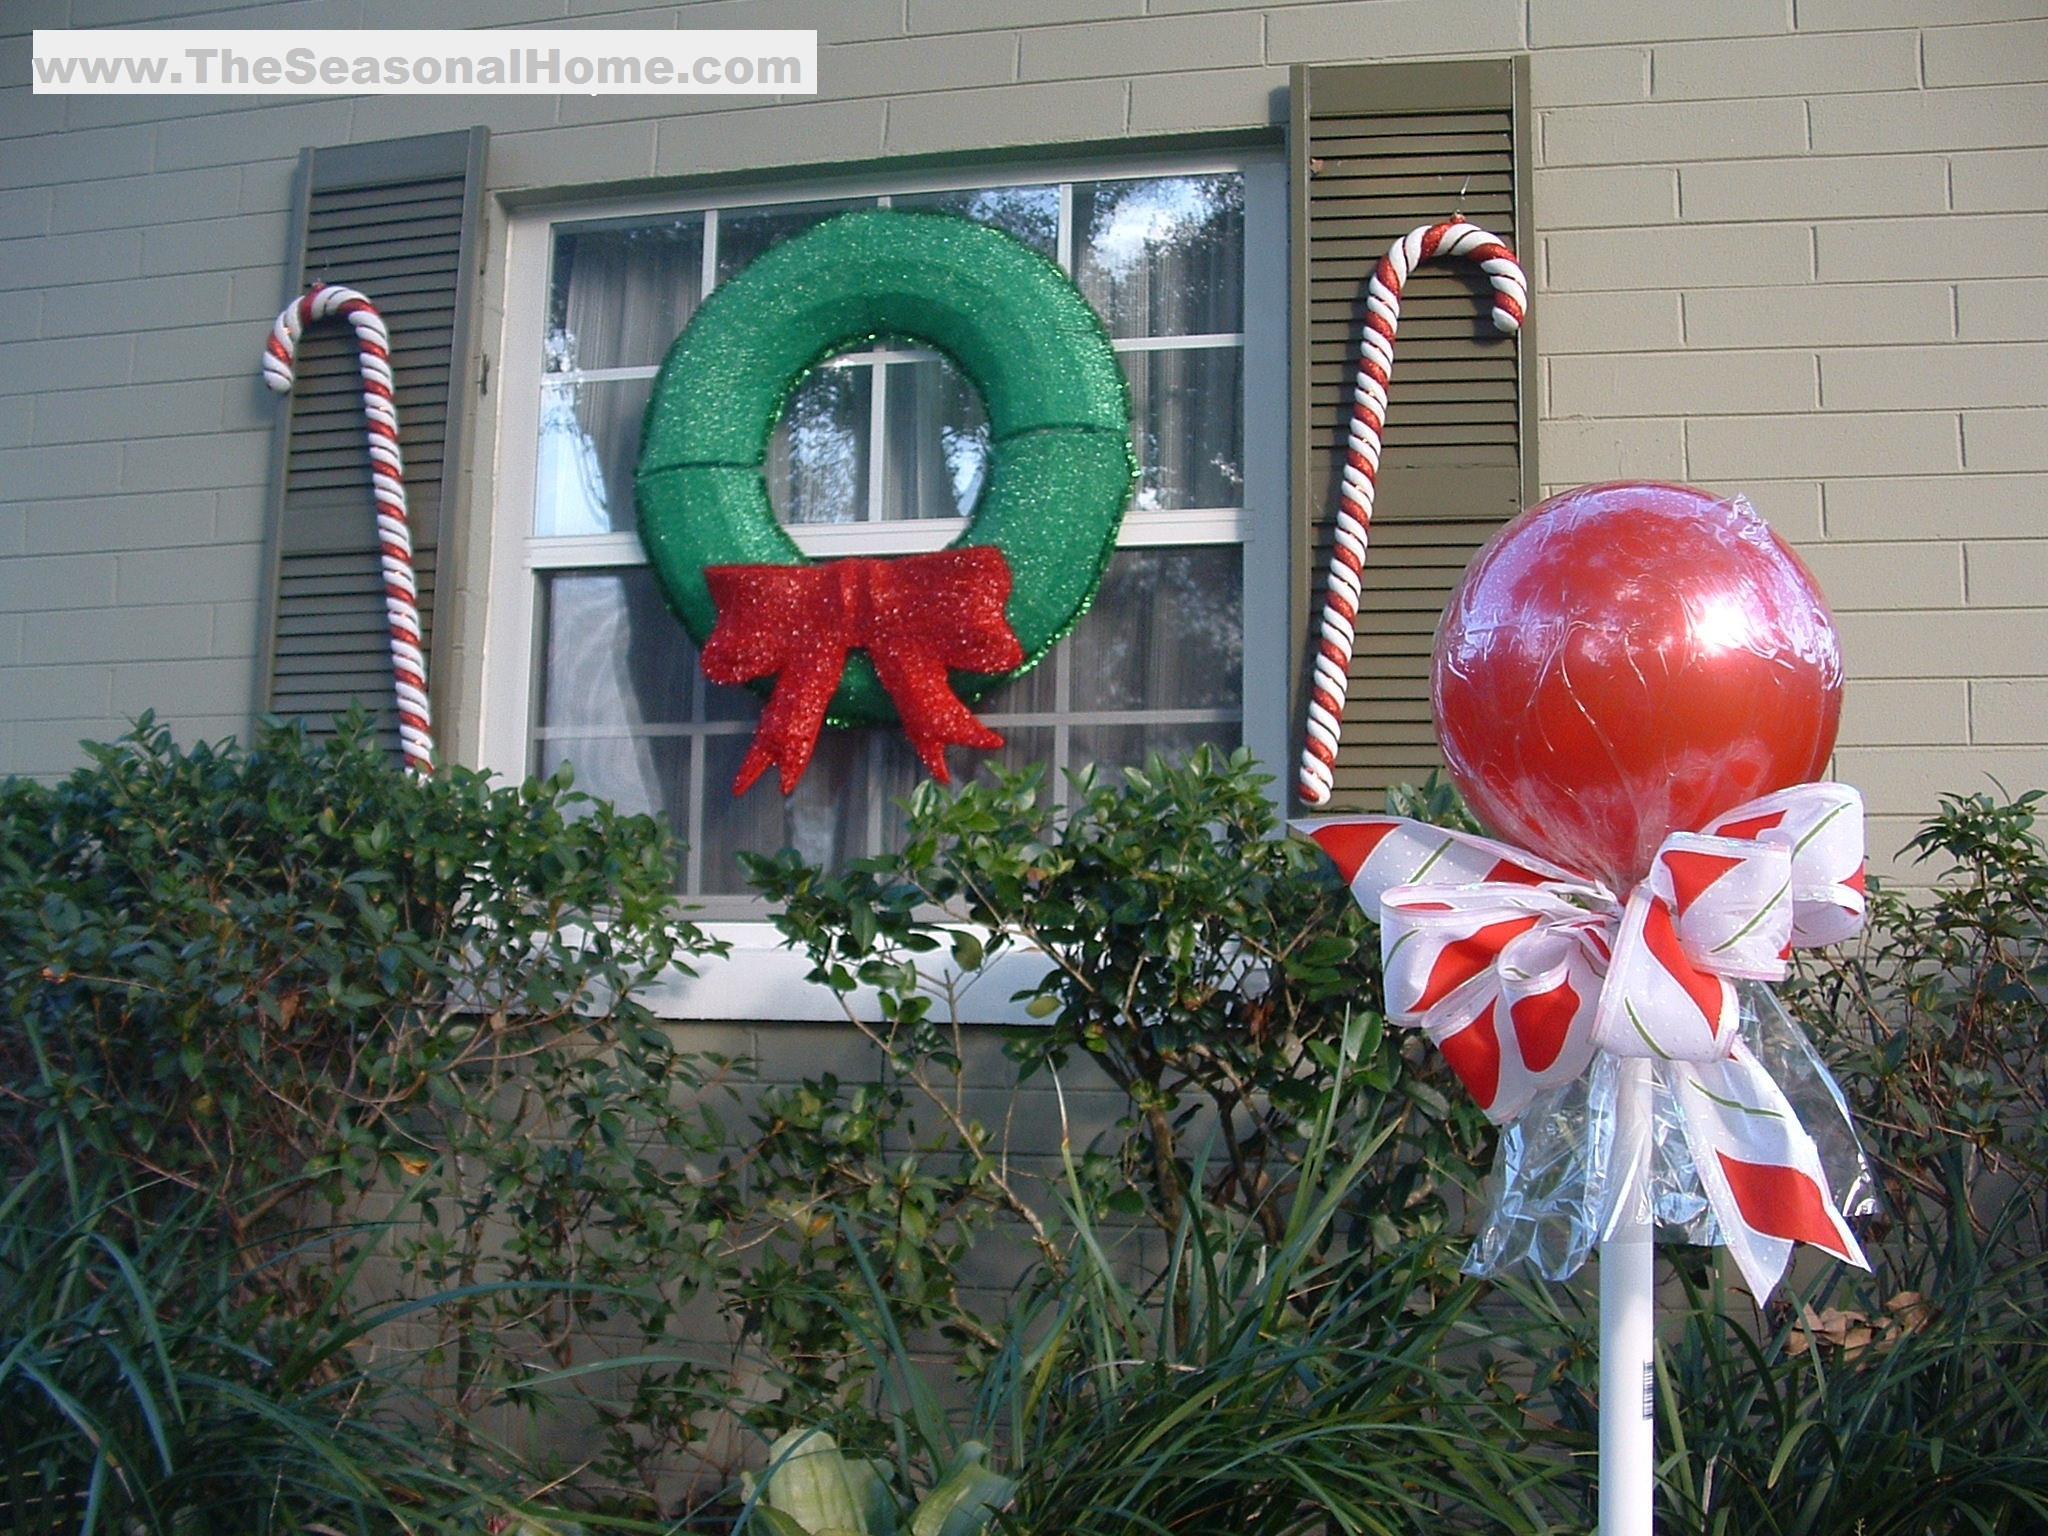 Diy Christmas Candy Decorations
 Outdoor “CANDY” A Christmas Decorating Idea The